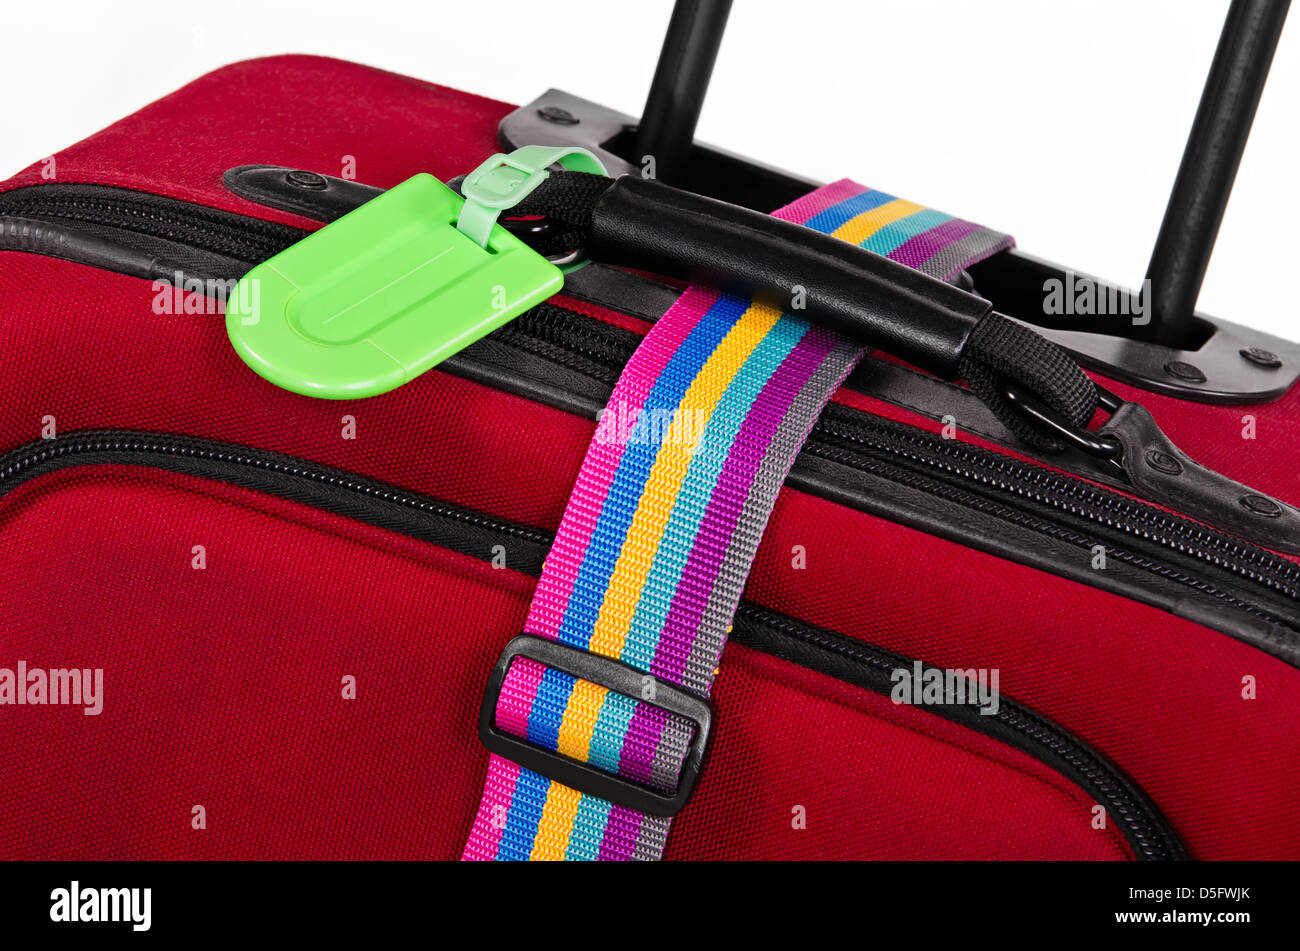 Closeup of bright green luggage tag and colorful belt on red suitcase Stock Photo